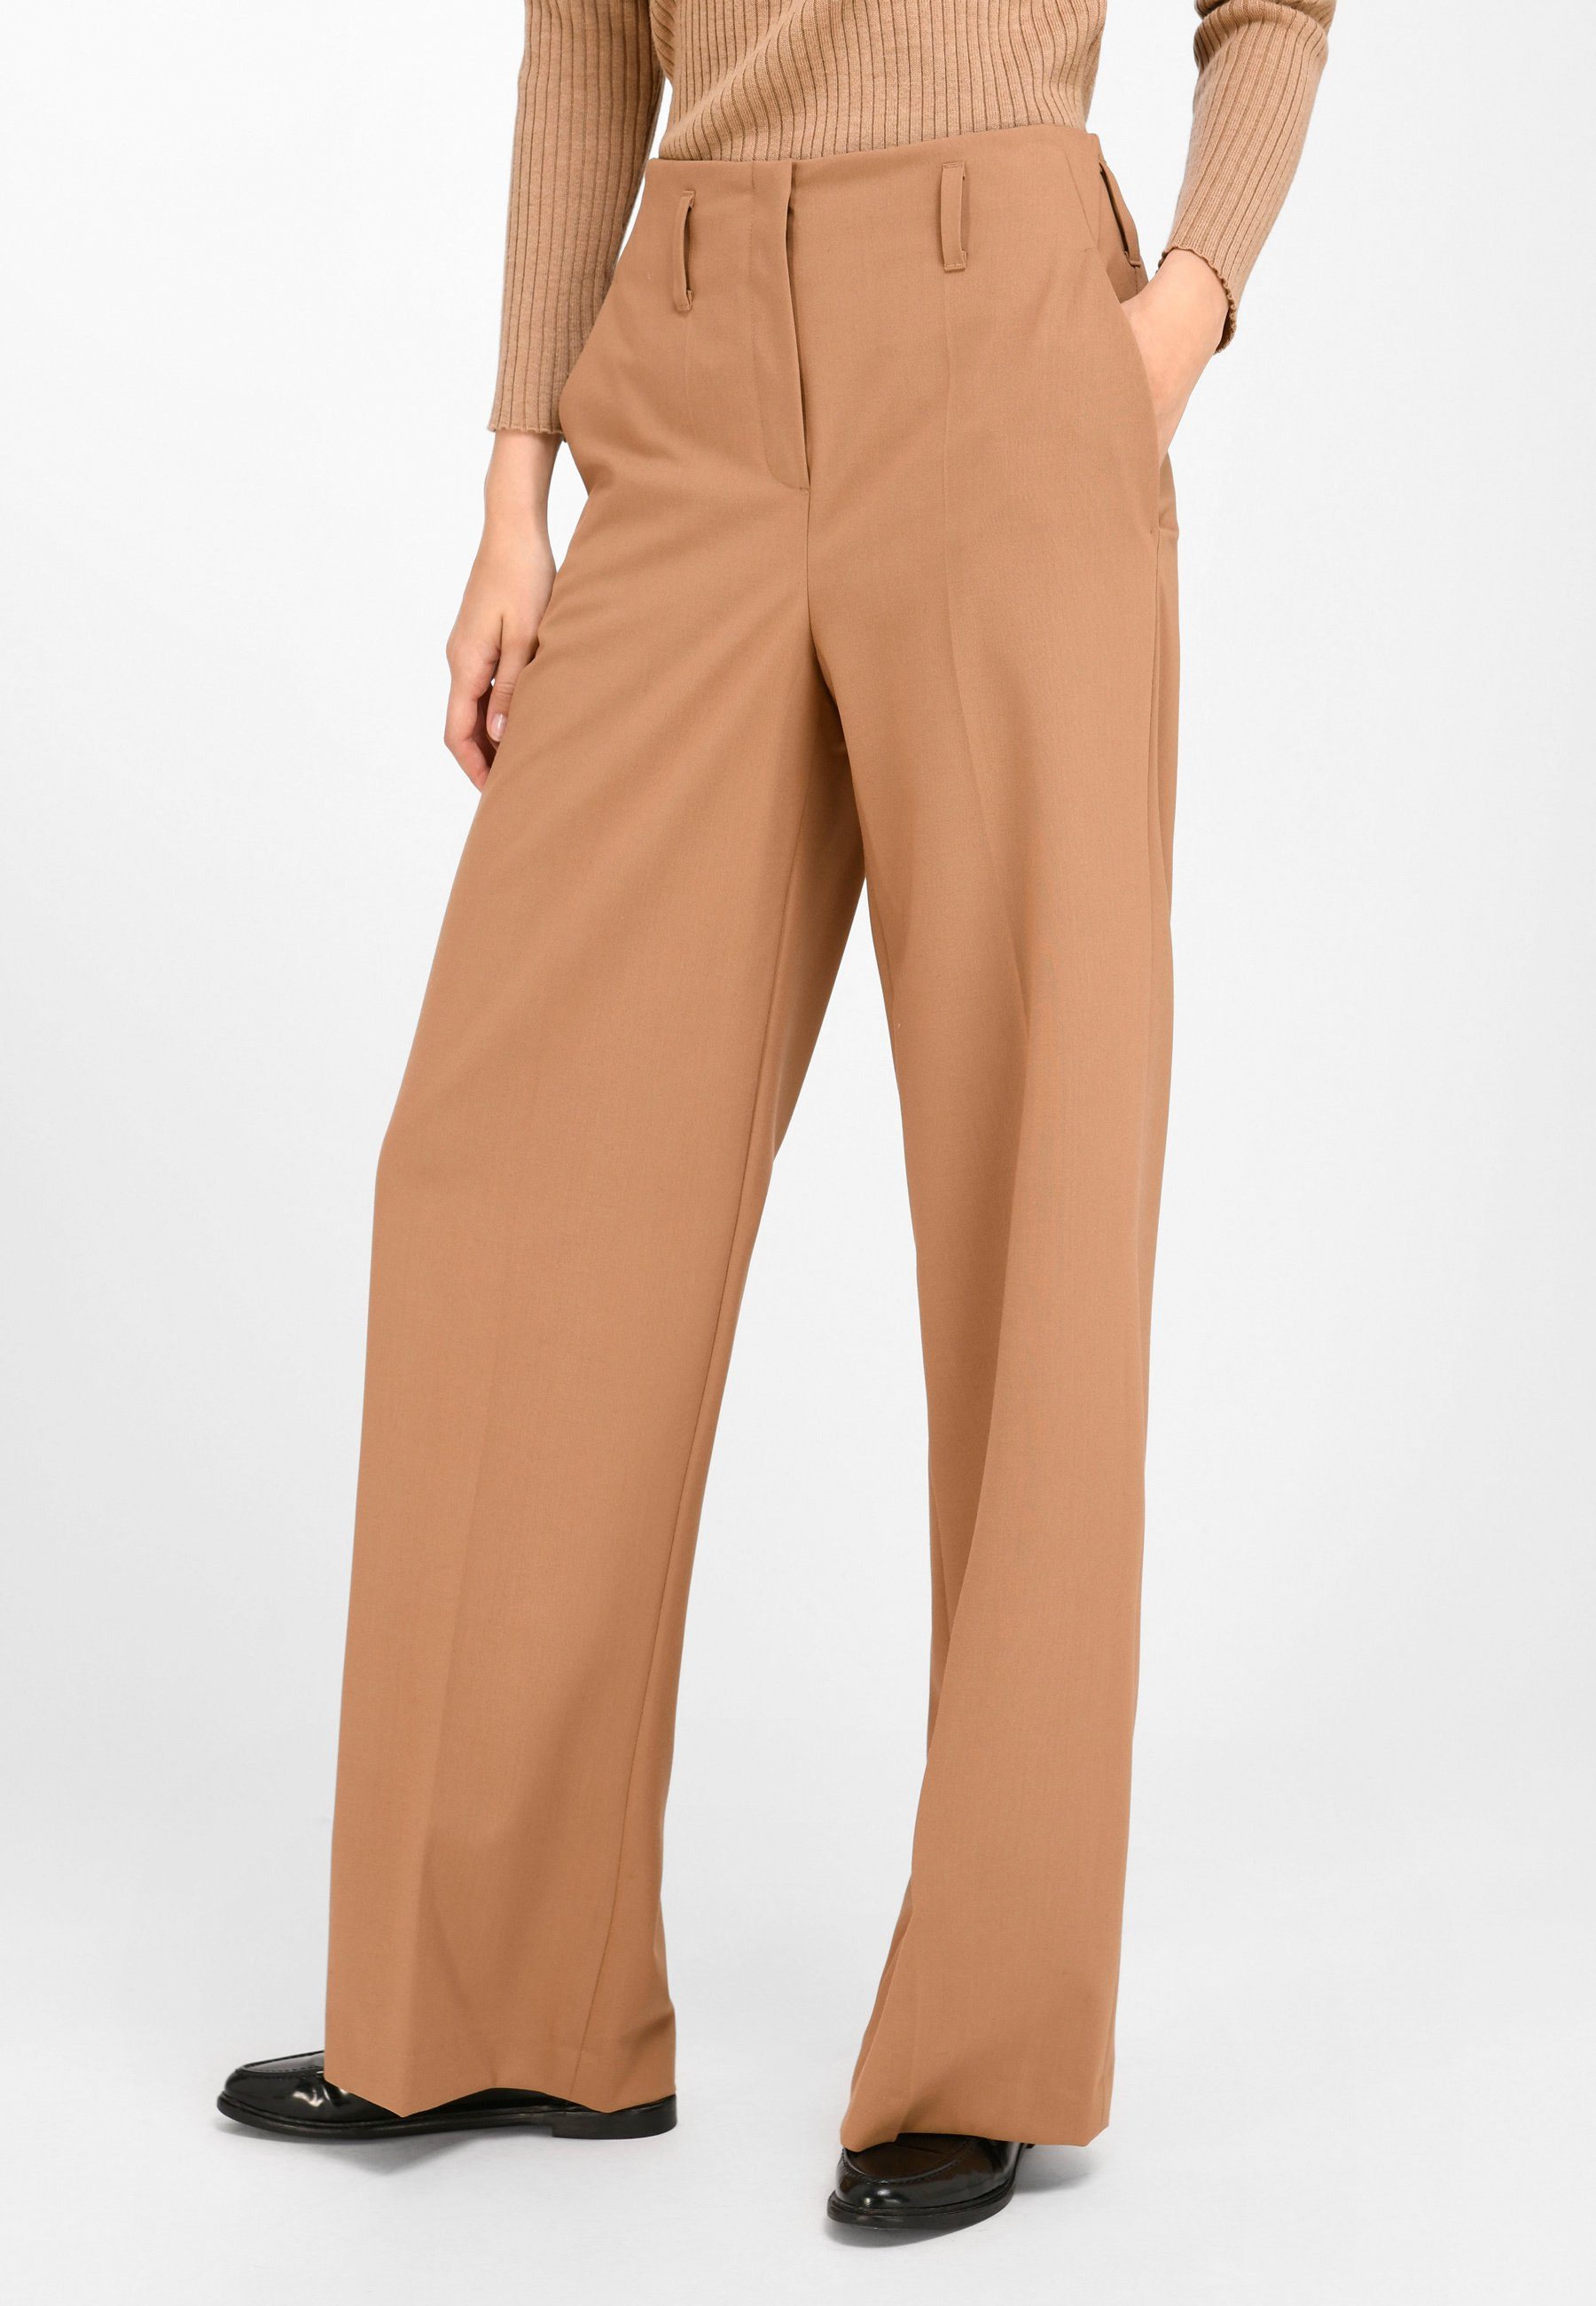 Peter Hahn Stoffhose Trousers LIGHT BROWN